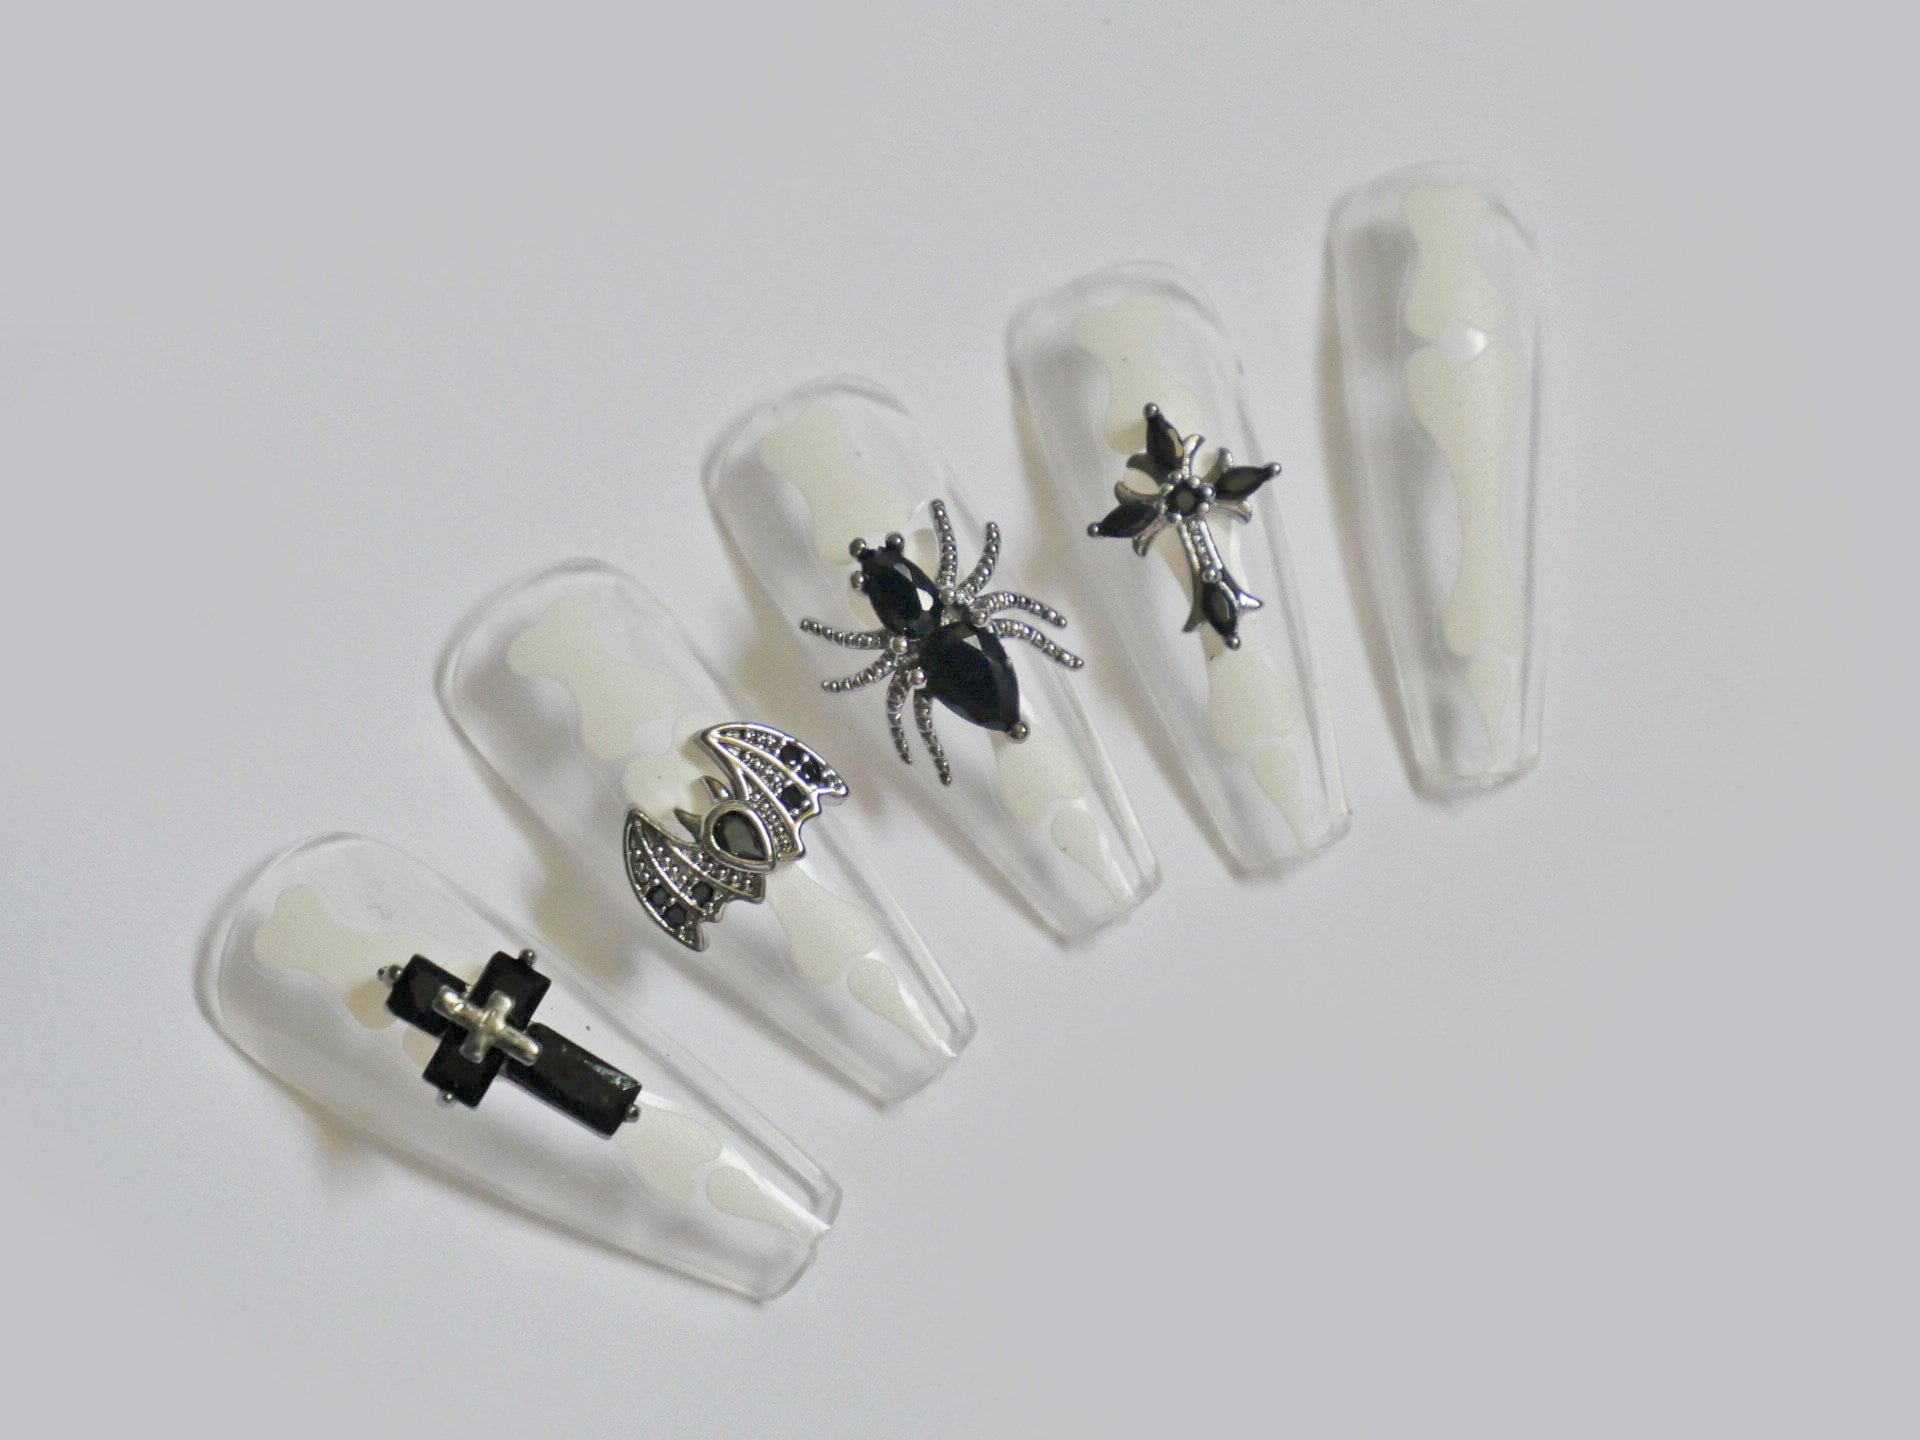 4pcs Black Zircon Spider Cross Bat Nail Decals/ Spooky Darkness Witch Nail DIY/ Horror Party Halloween 3D Punk Nail Jewelry Charms